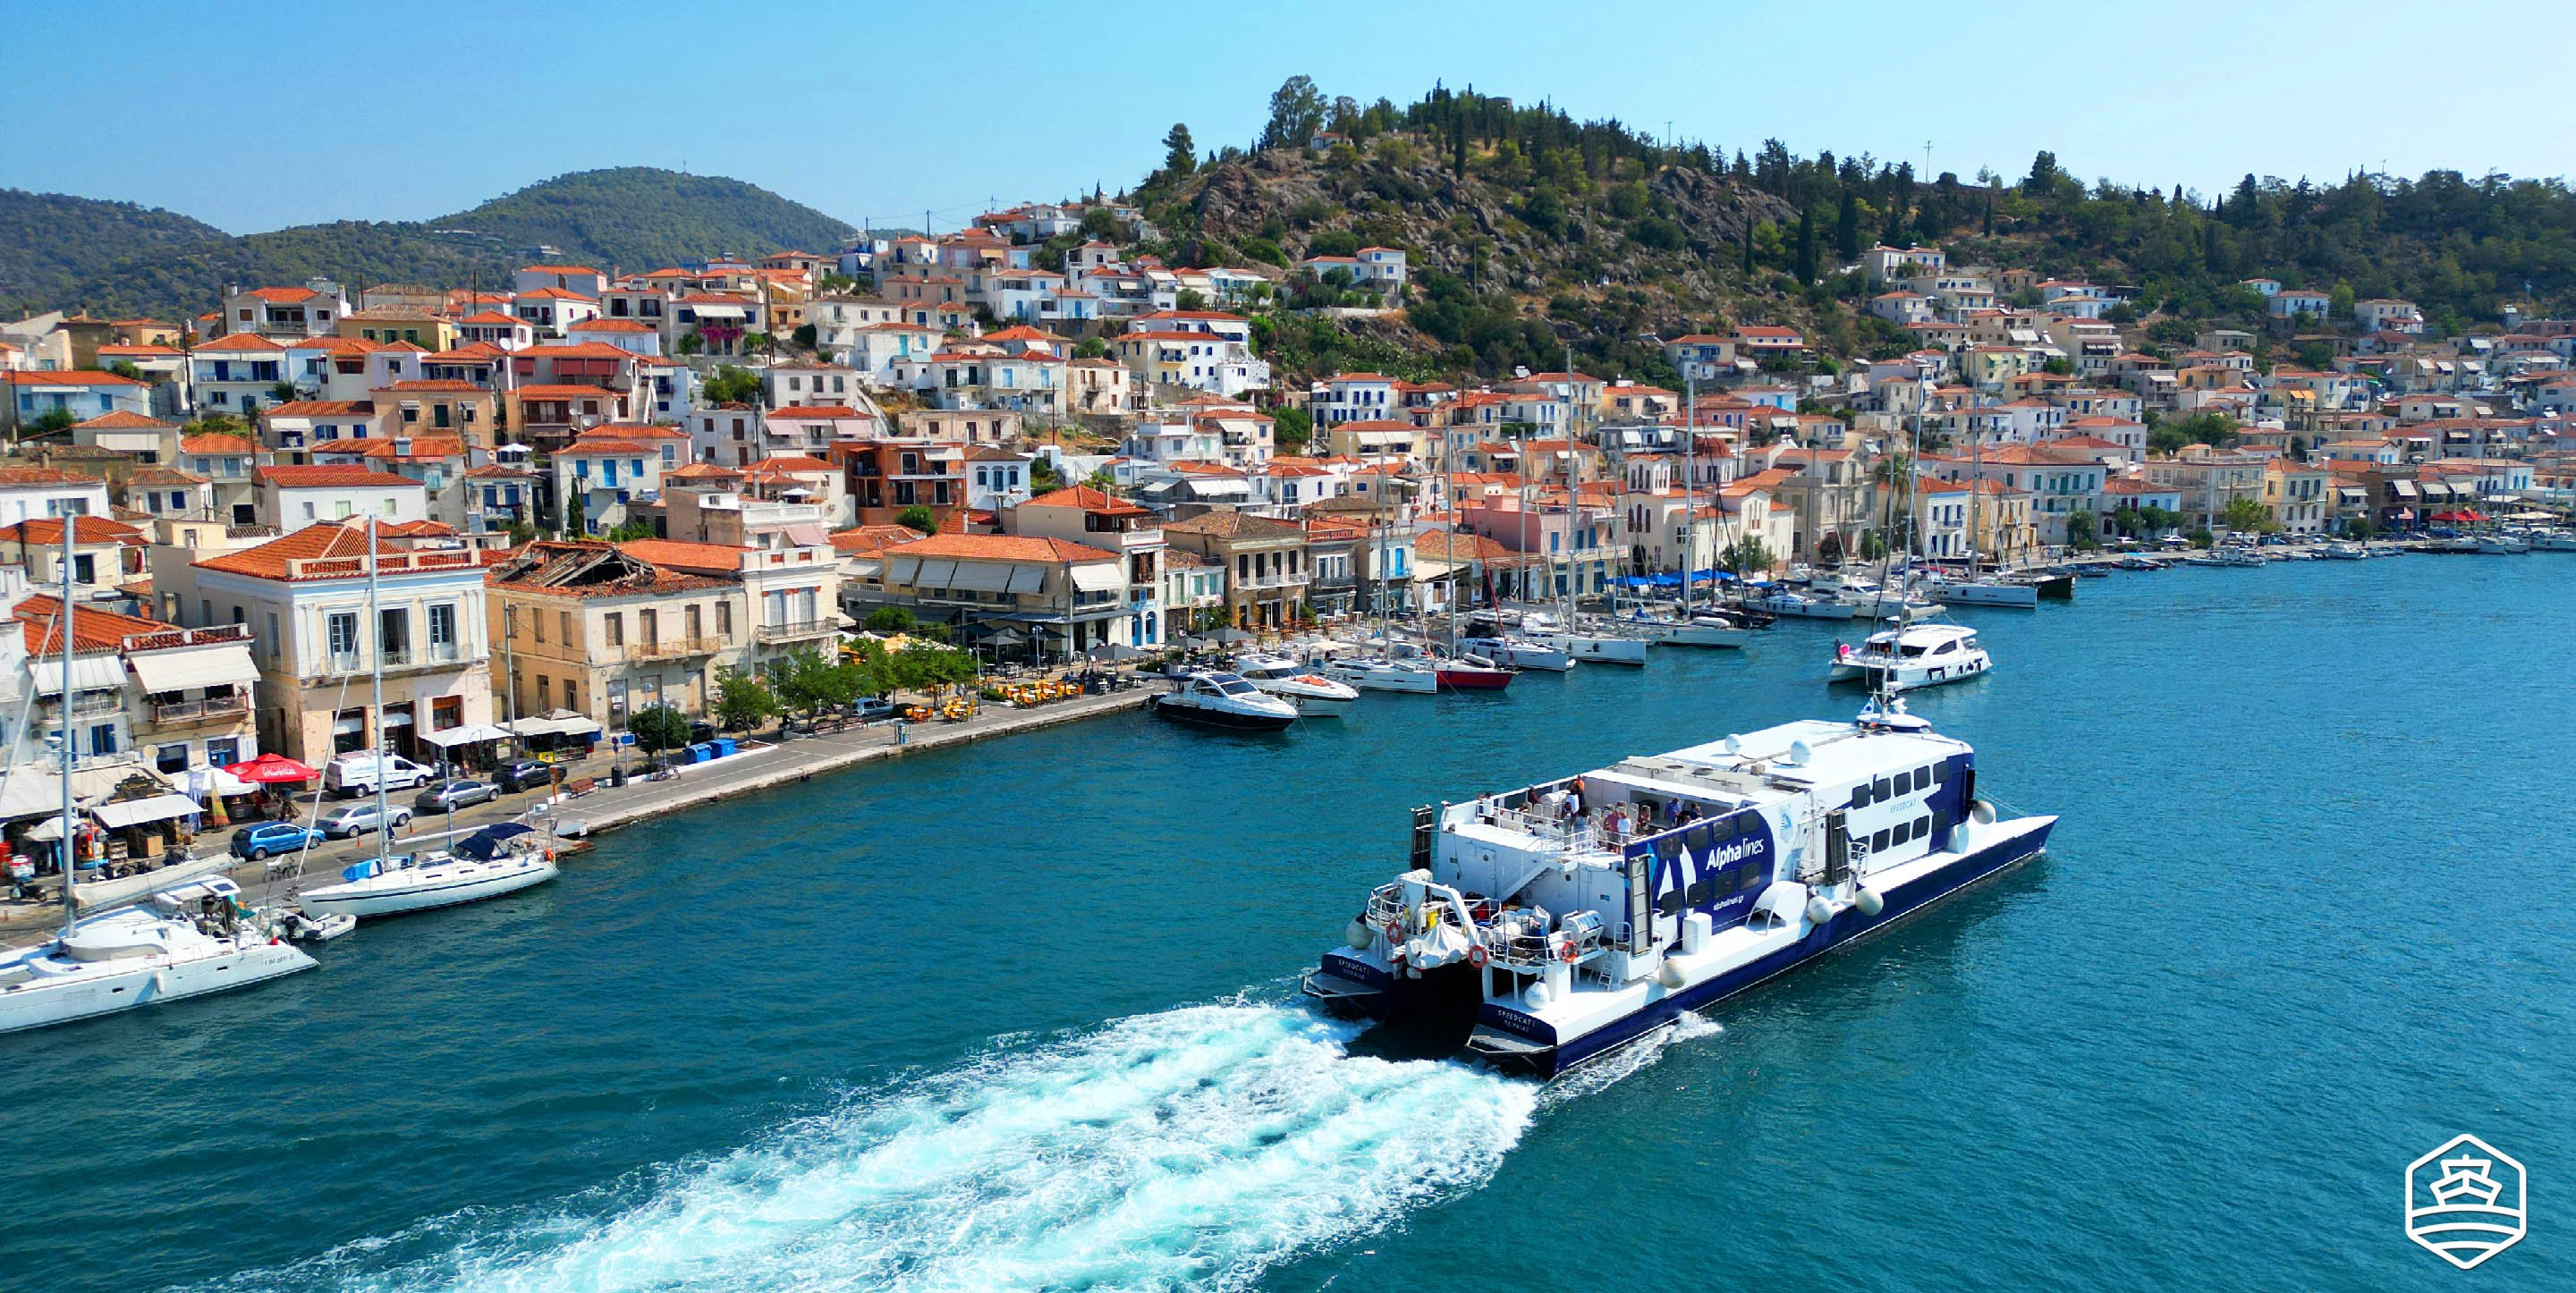 The high-speed ferry Speed Cat 1 by Alpha Lines arriving in the port of Poros